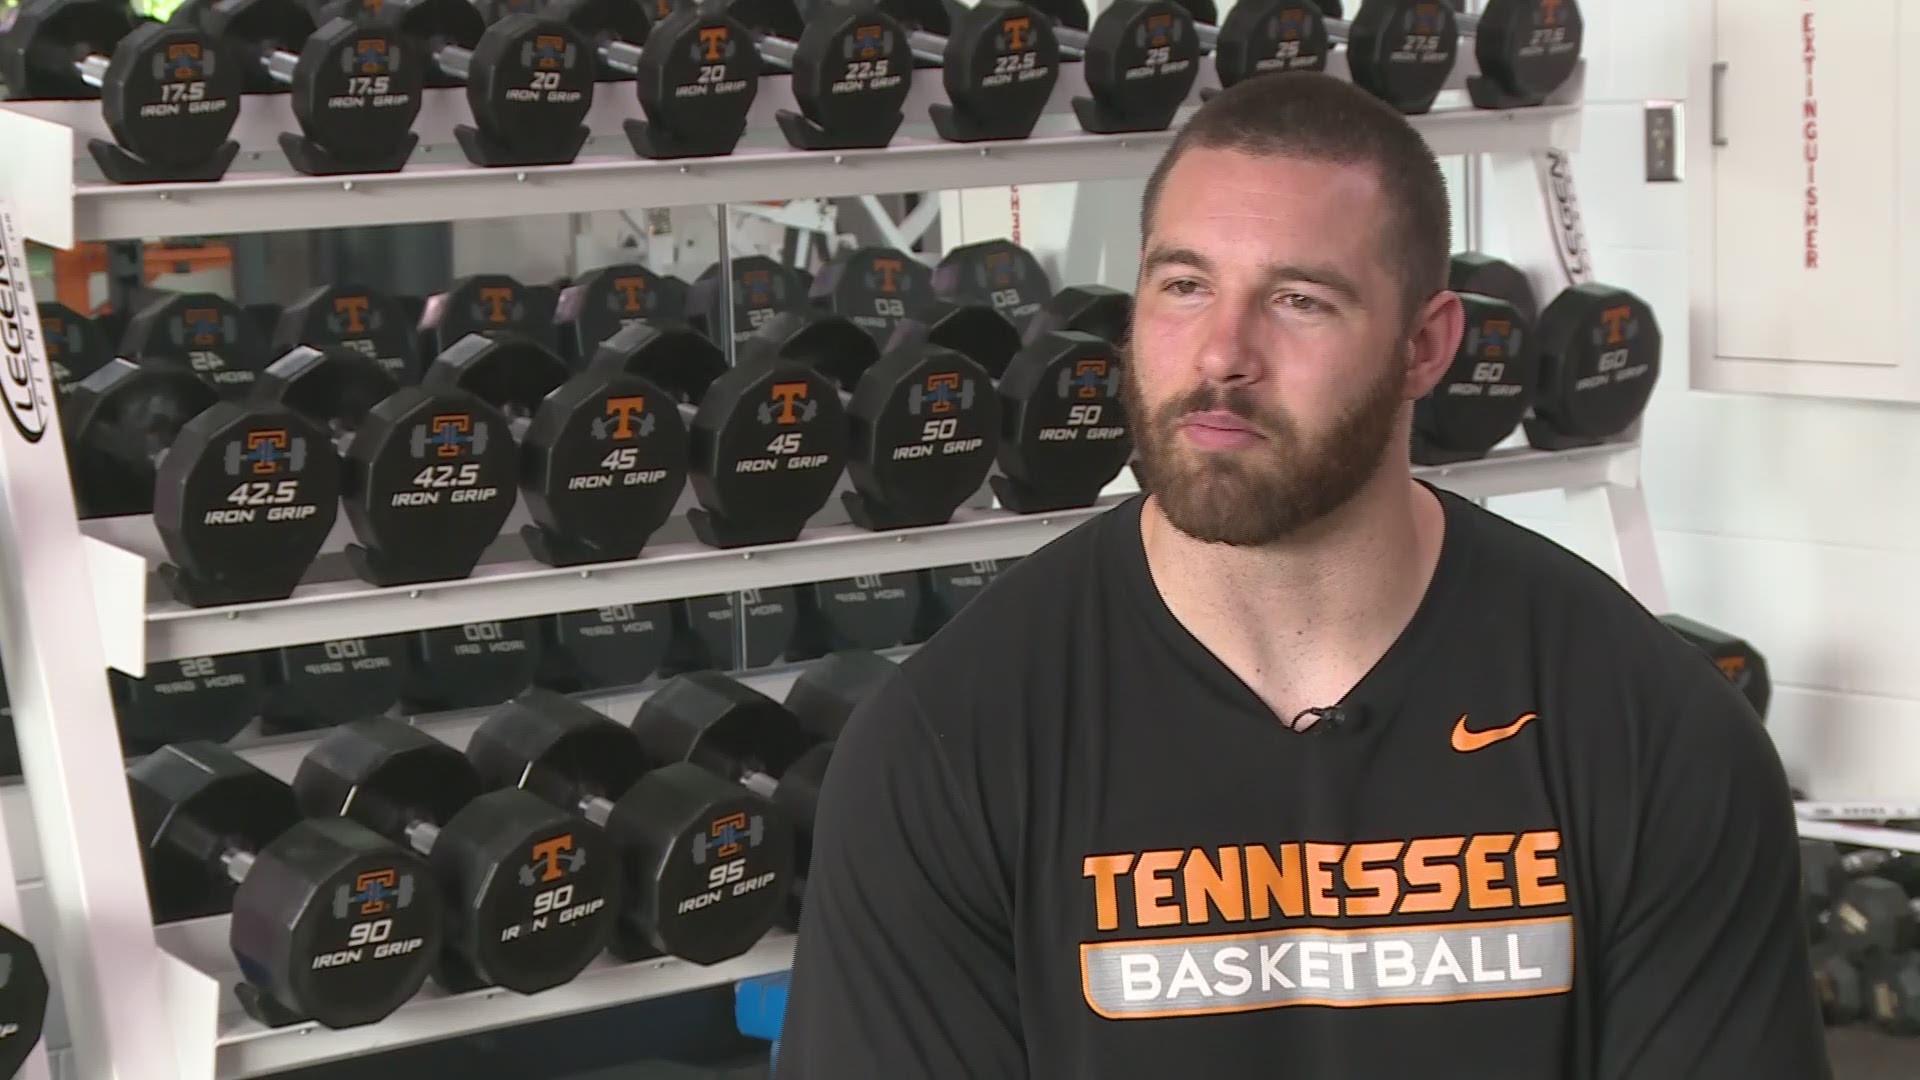 Tennessee basketball strength coach Garrett Medenwald talks about how he started working with head coach Rick Barnes. When he was in college at Wisconsin-Whitewater he drove down to Texas on his own dime to learn about the sport specific training Barnes'